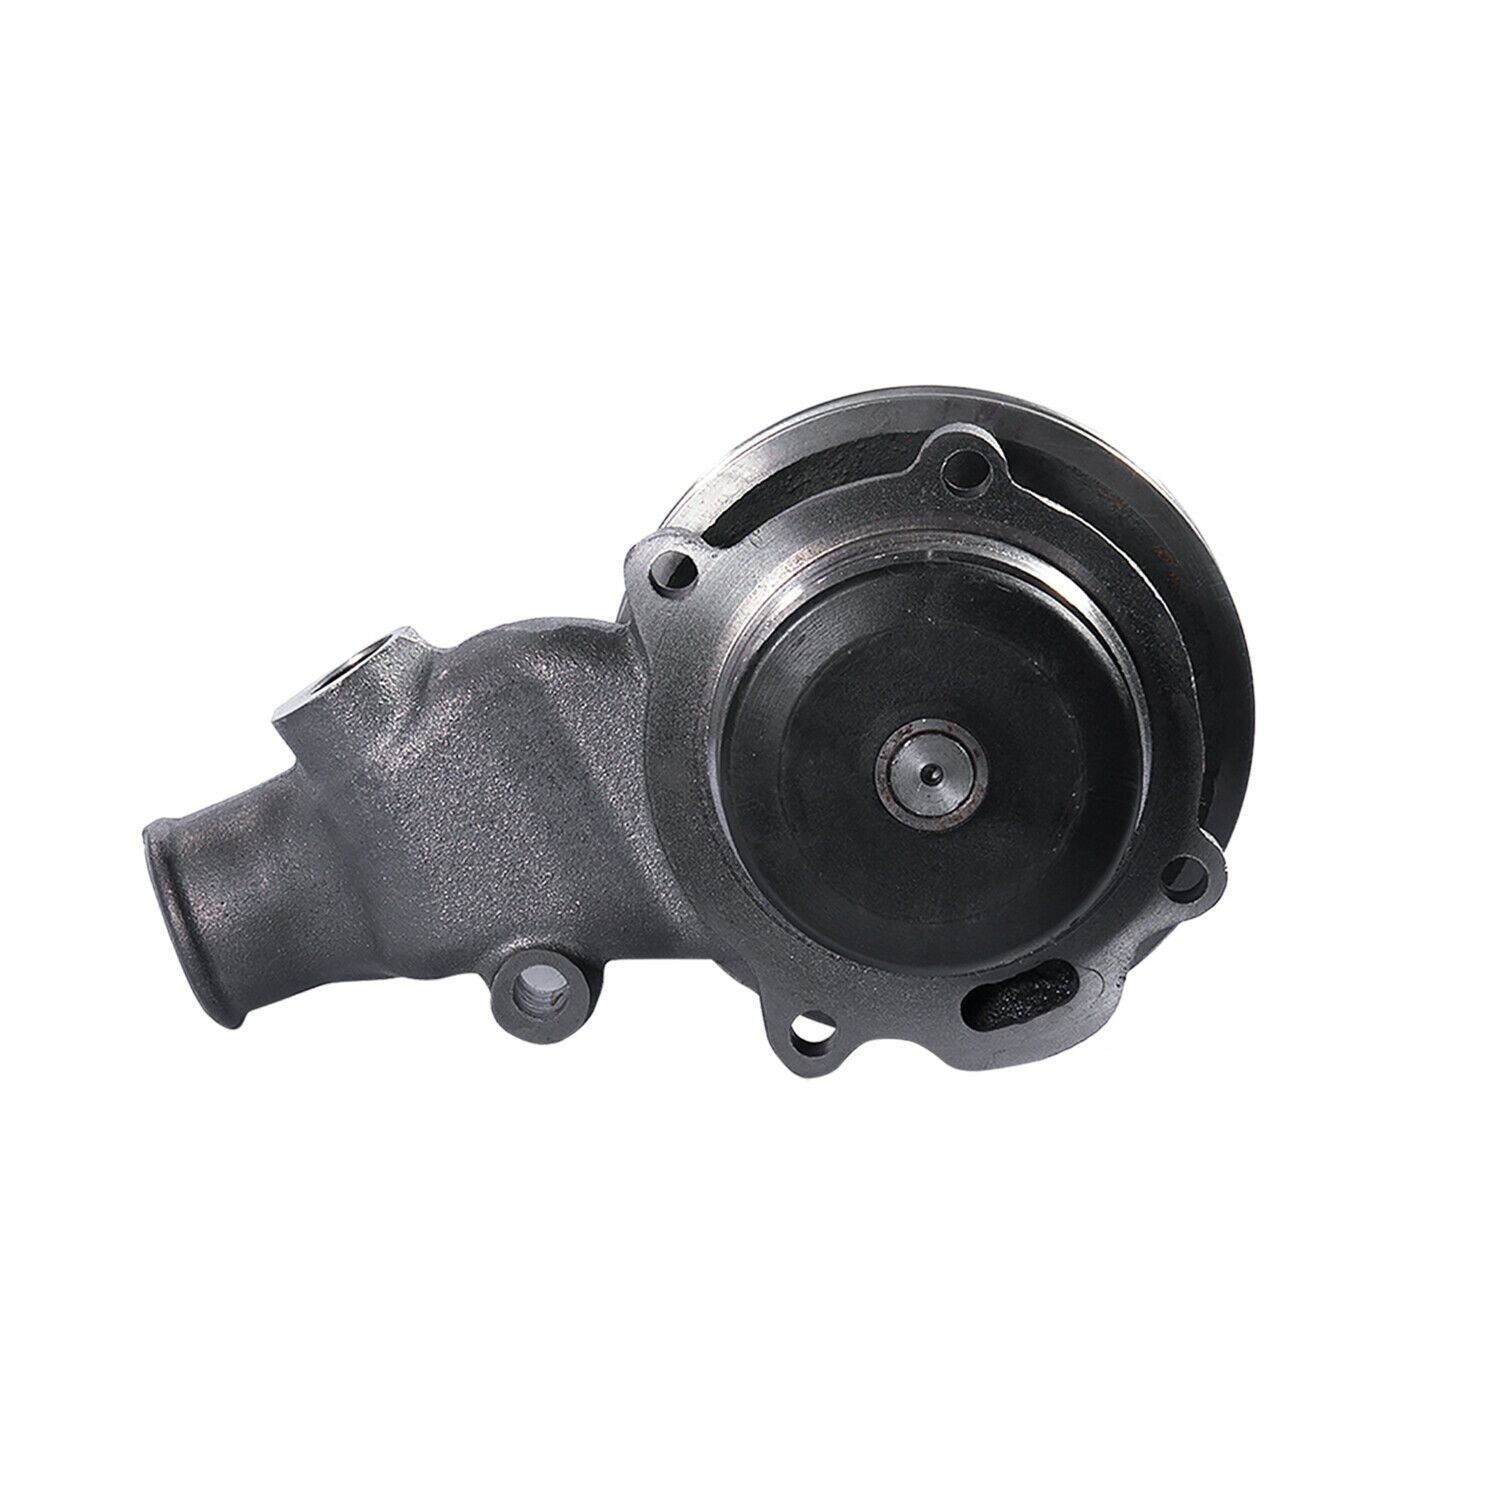 Water Pump with Pulley for Perkins 4.236 , Massey Ferguson U5MW0104 , 4131A013 +